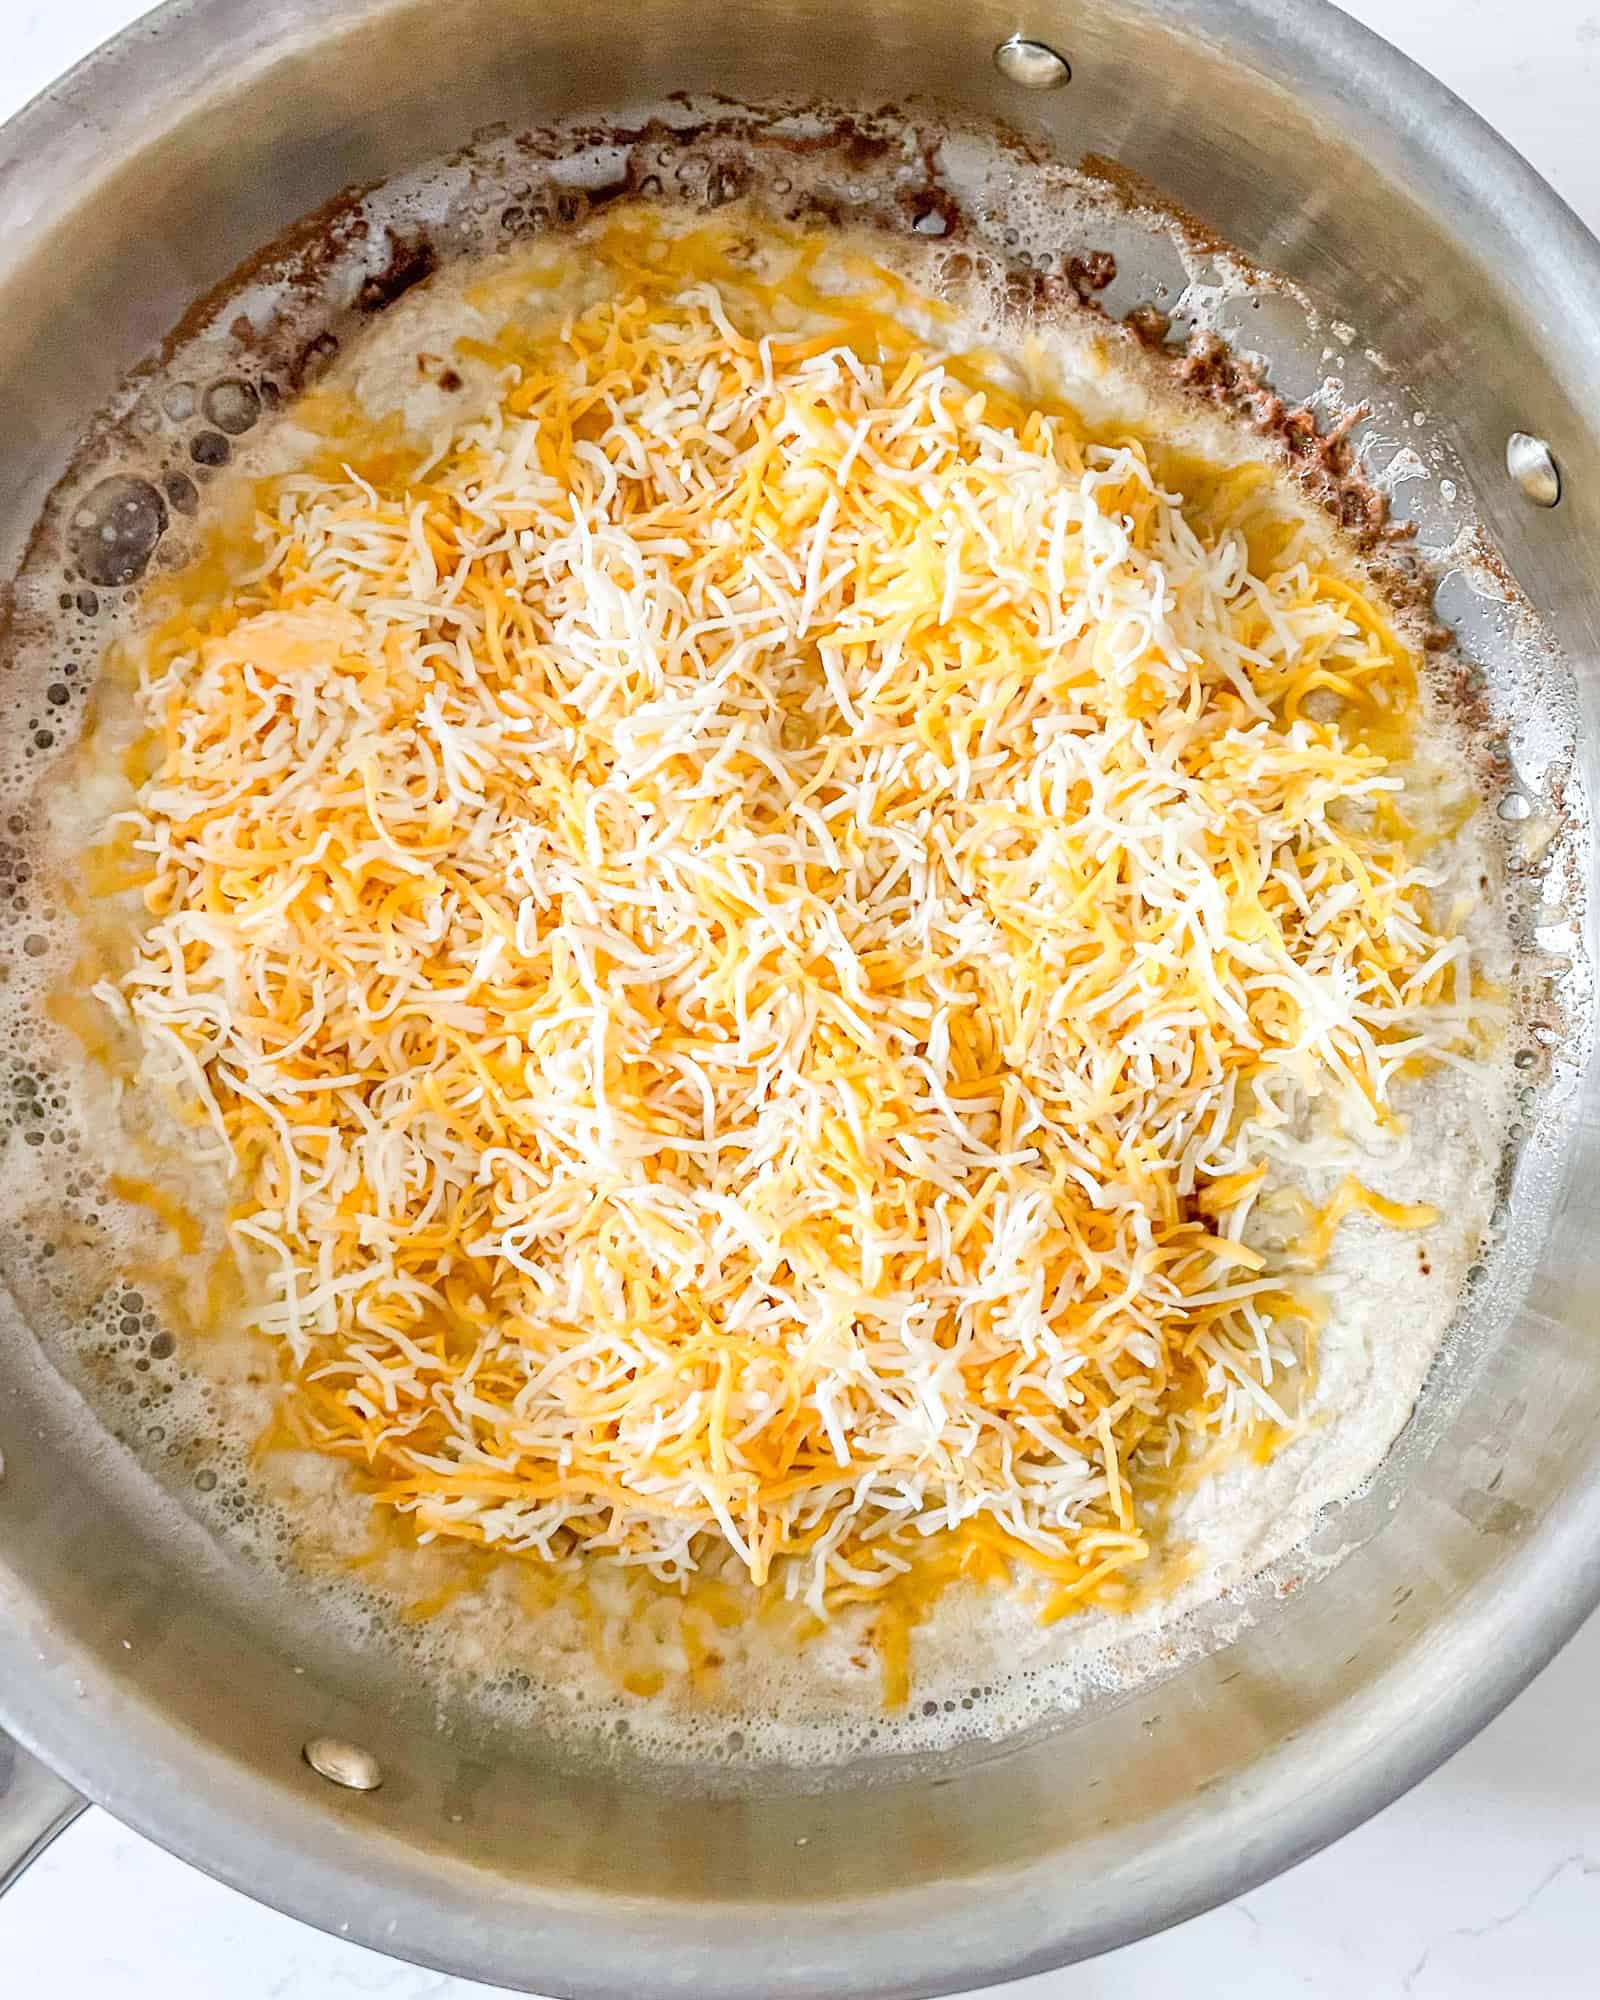 cheese on top of a flour tortilla in a frying pan.